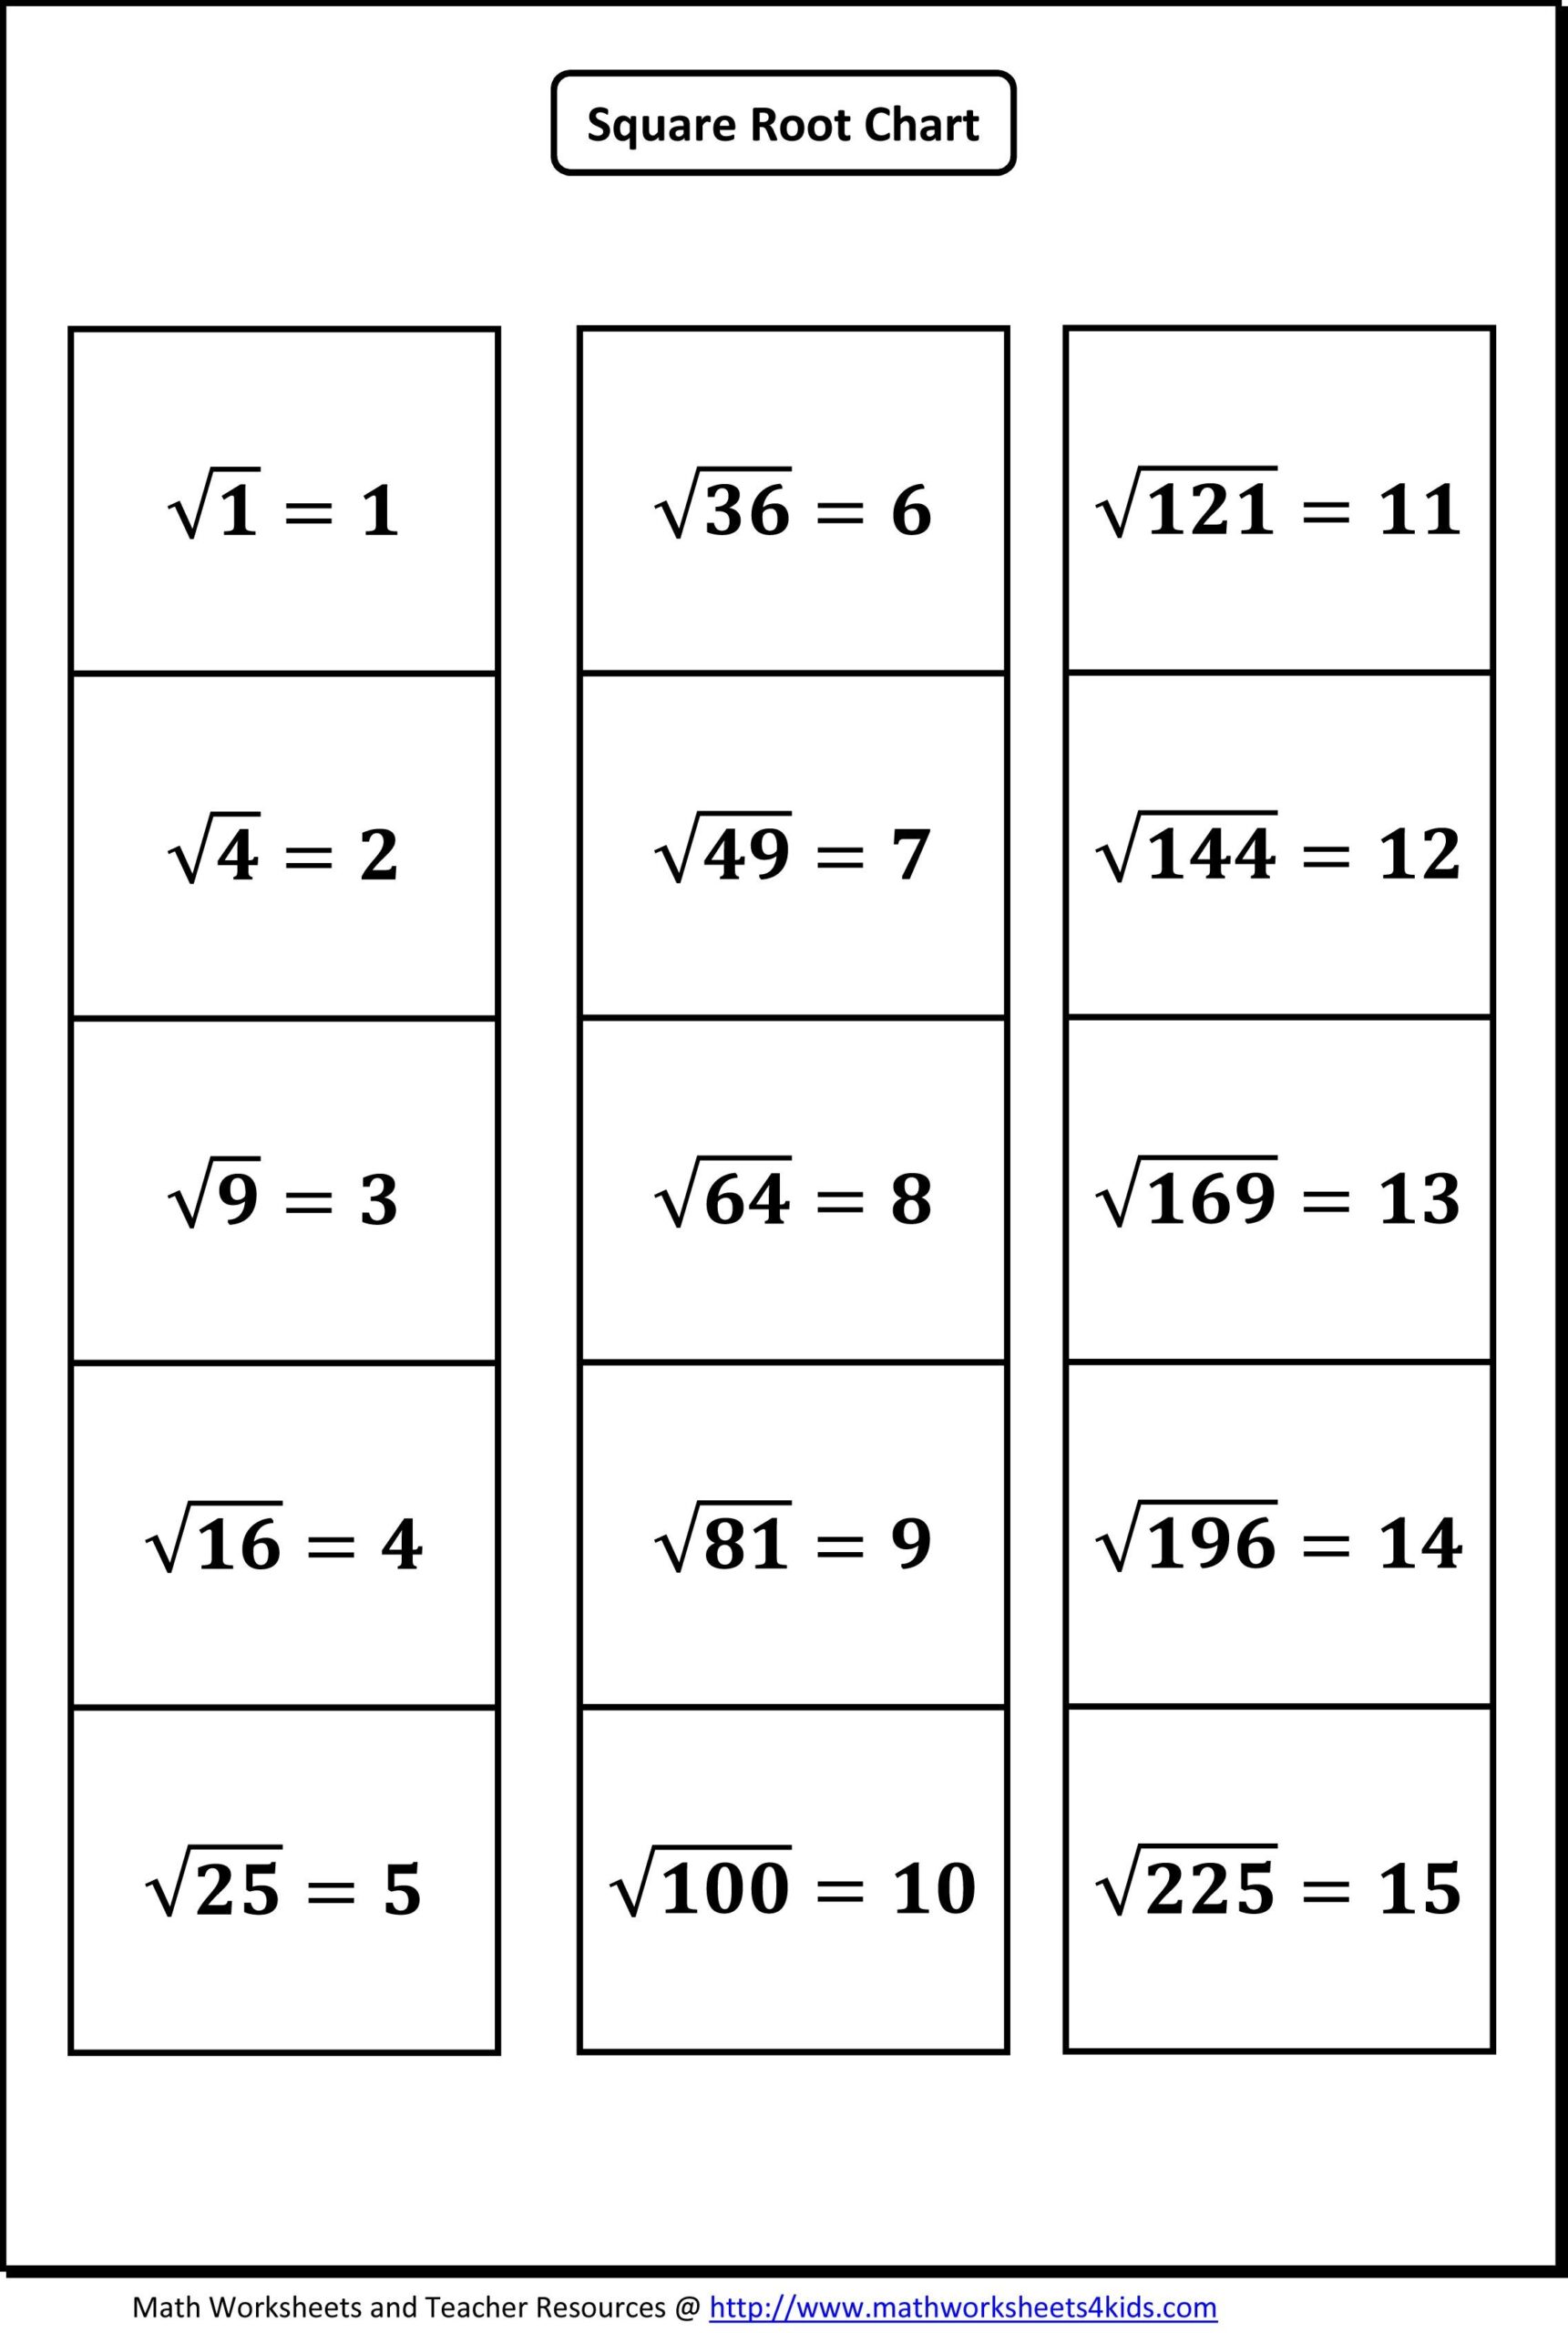 Square Root Worksheets Math Worksheets Square Roots Free Printable Math Worksheets